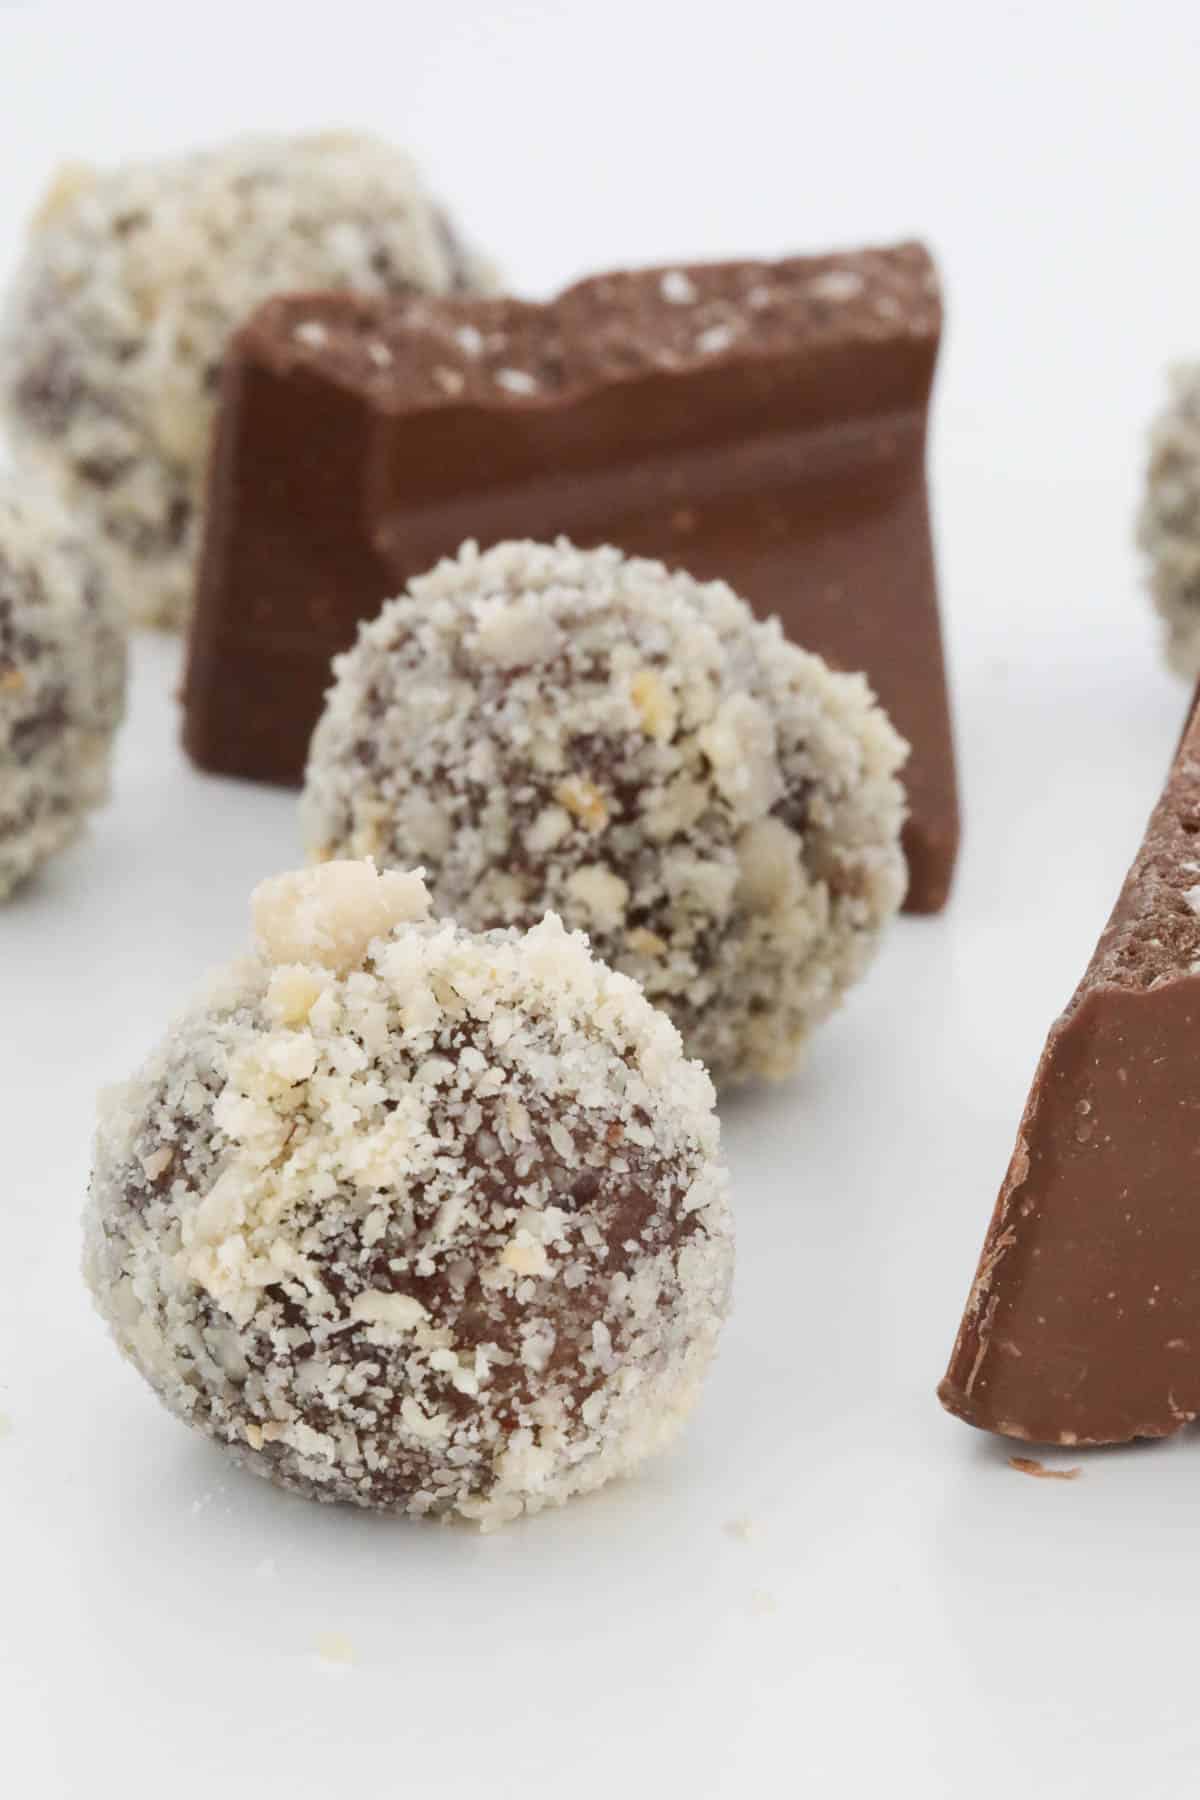 Close up of the finished truffle coated in finely chopped hazelnuts.